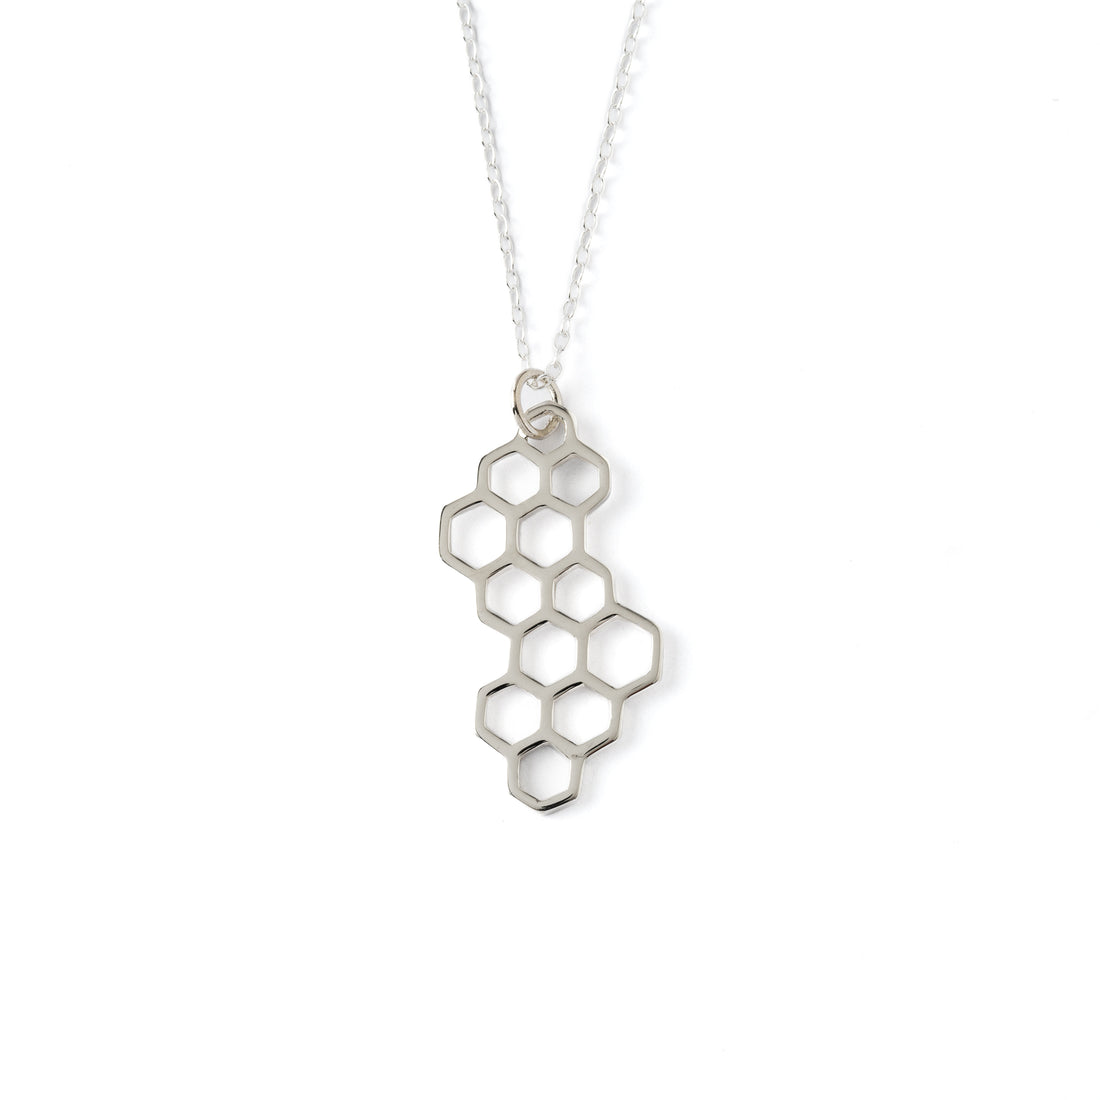 Honeycomb silver pendant necklace frontal view